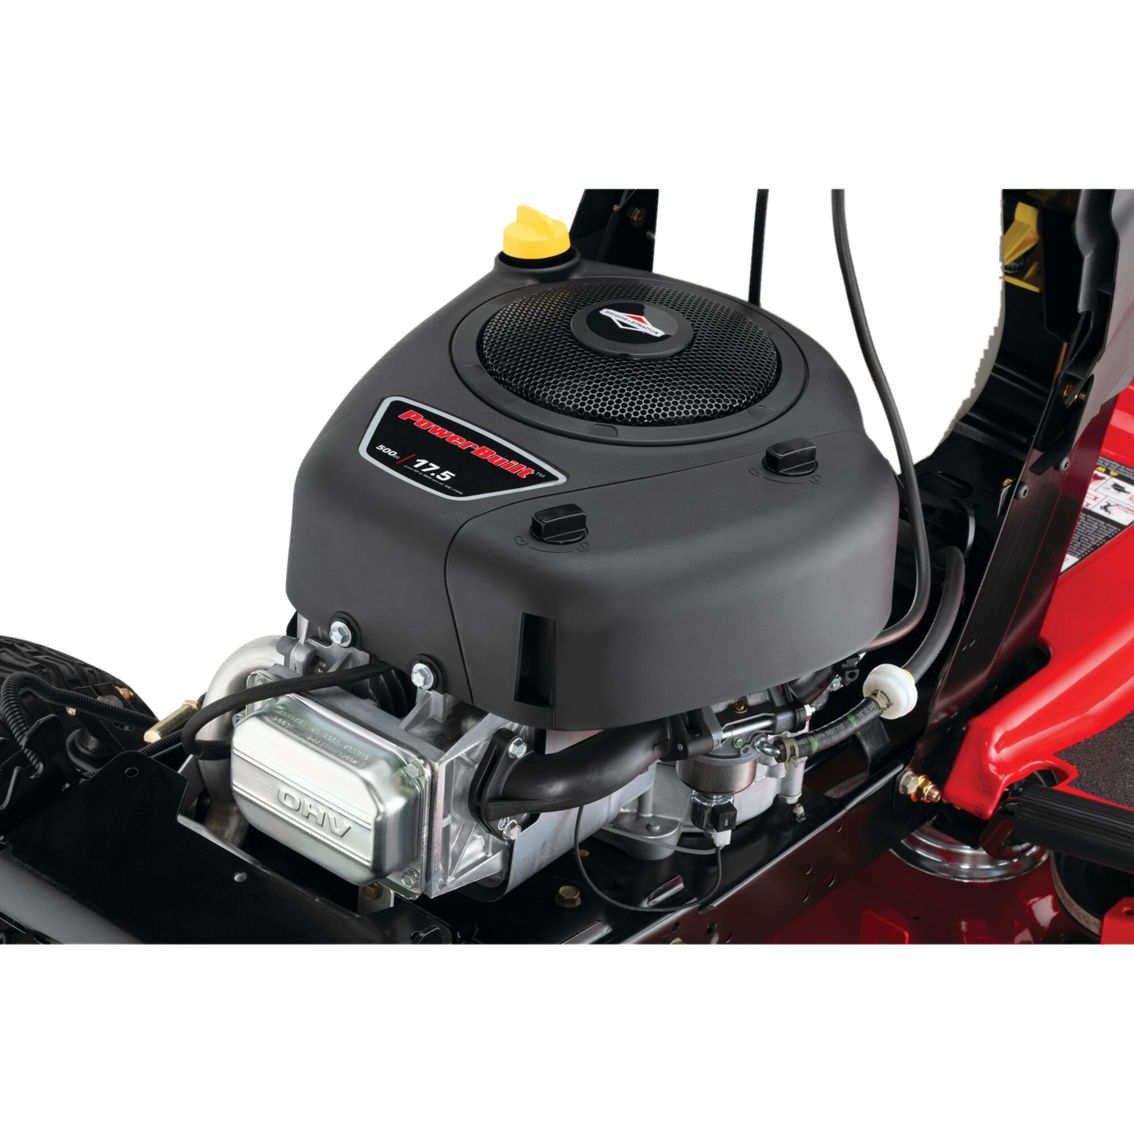 Craftsman 42-in. 17.5 HP Gas Riding Mower - Image 5 of 5